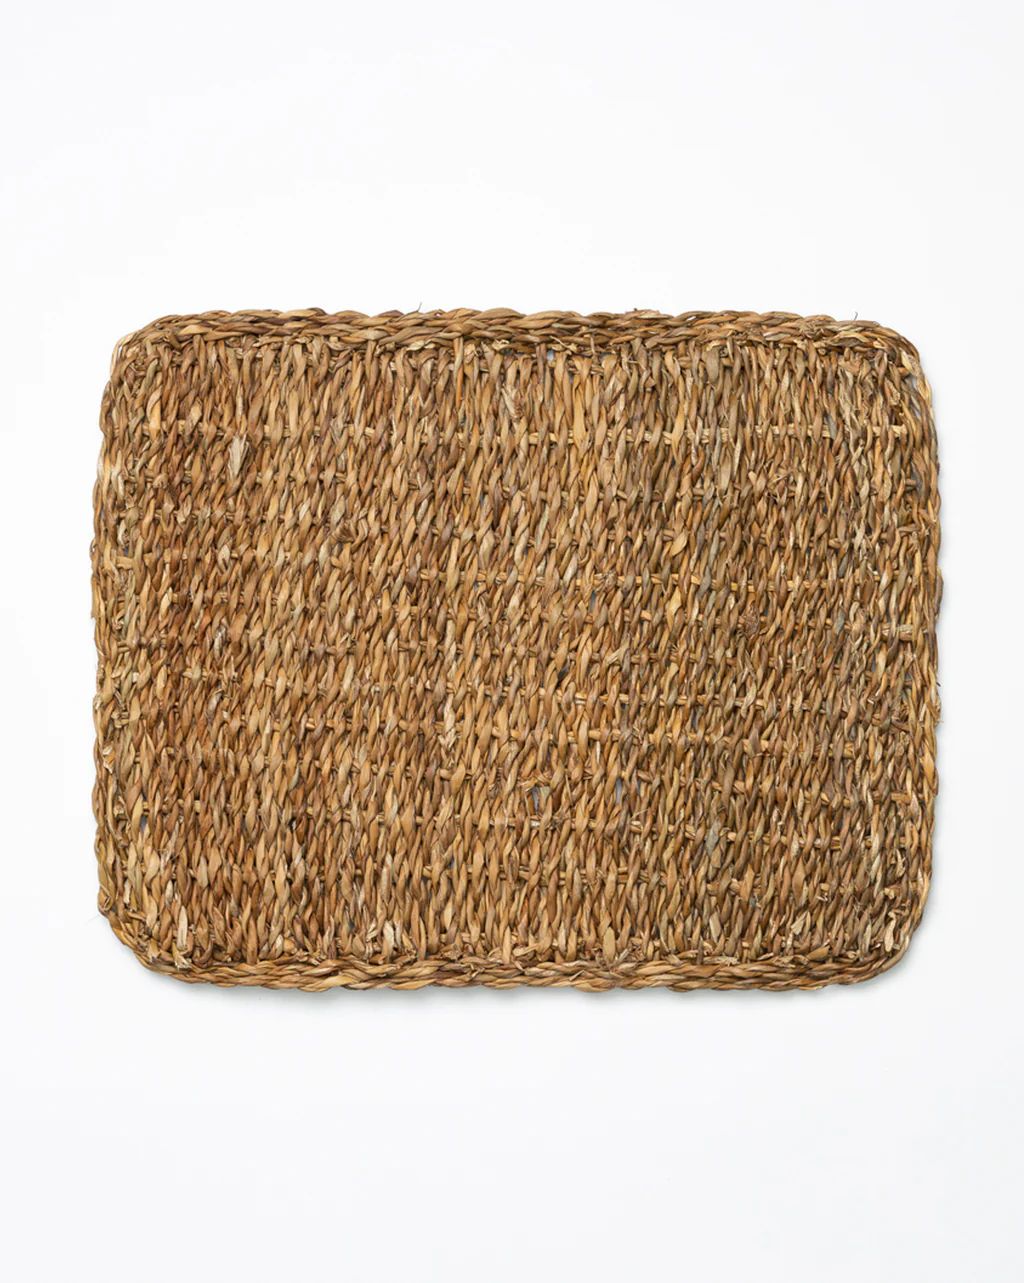 Woven Seagrass Rectangle Placemat | McGee & Co.